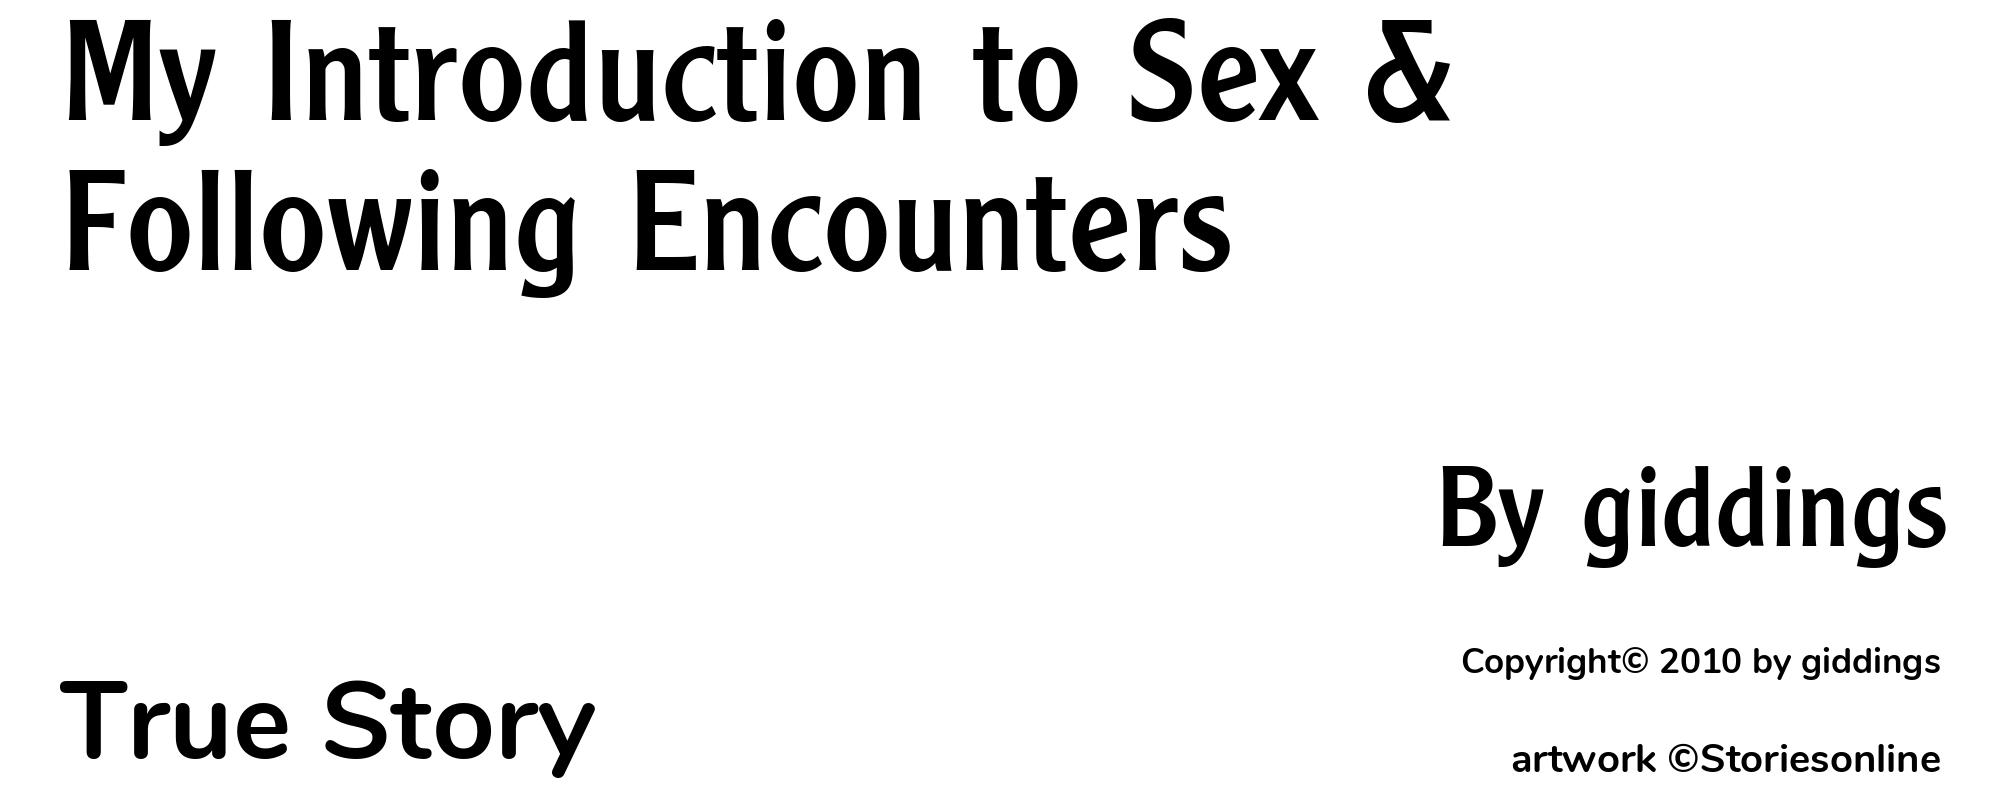 My Introduction to Sex & Following Encounters - Cover